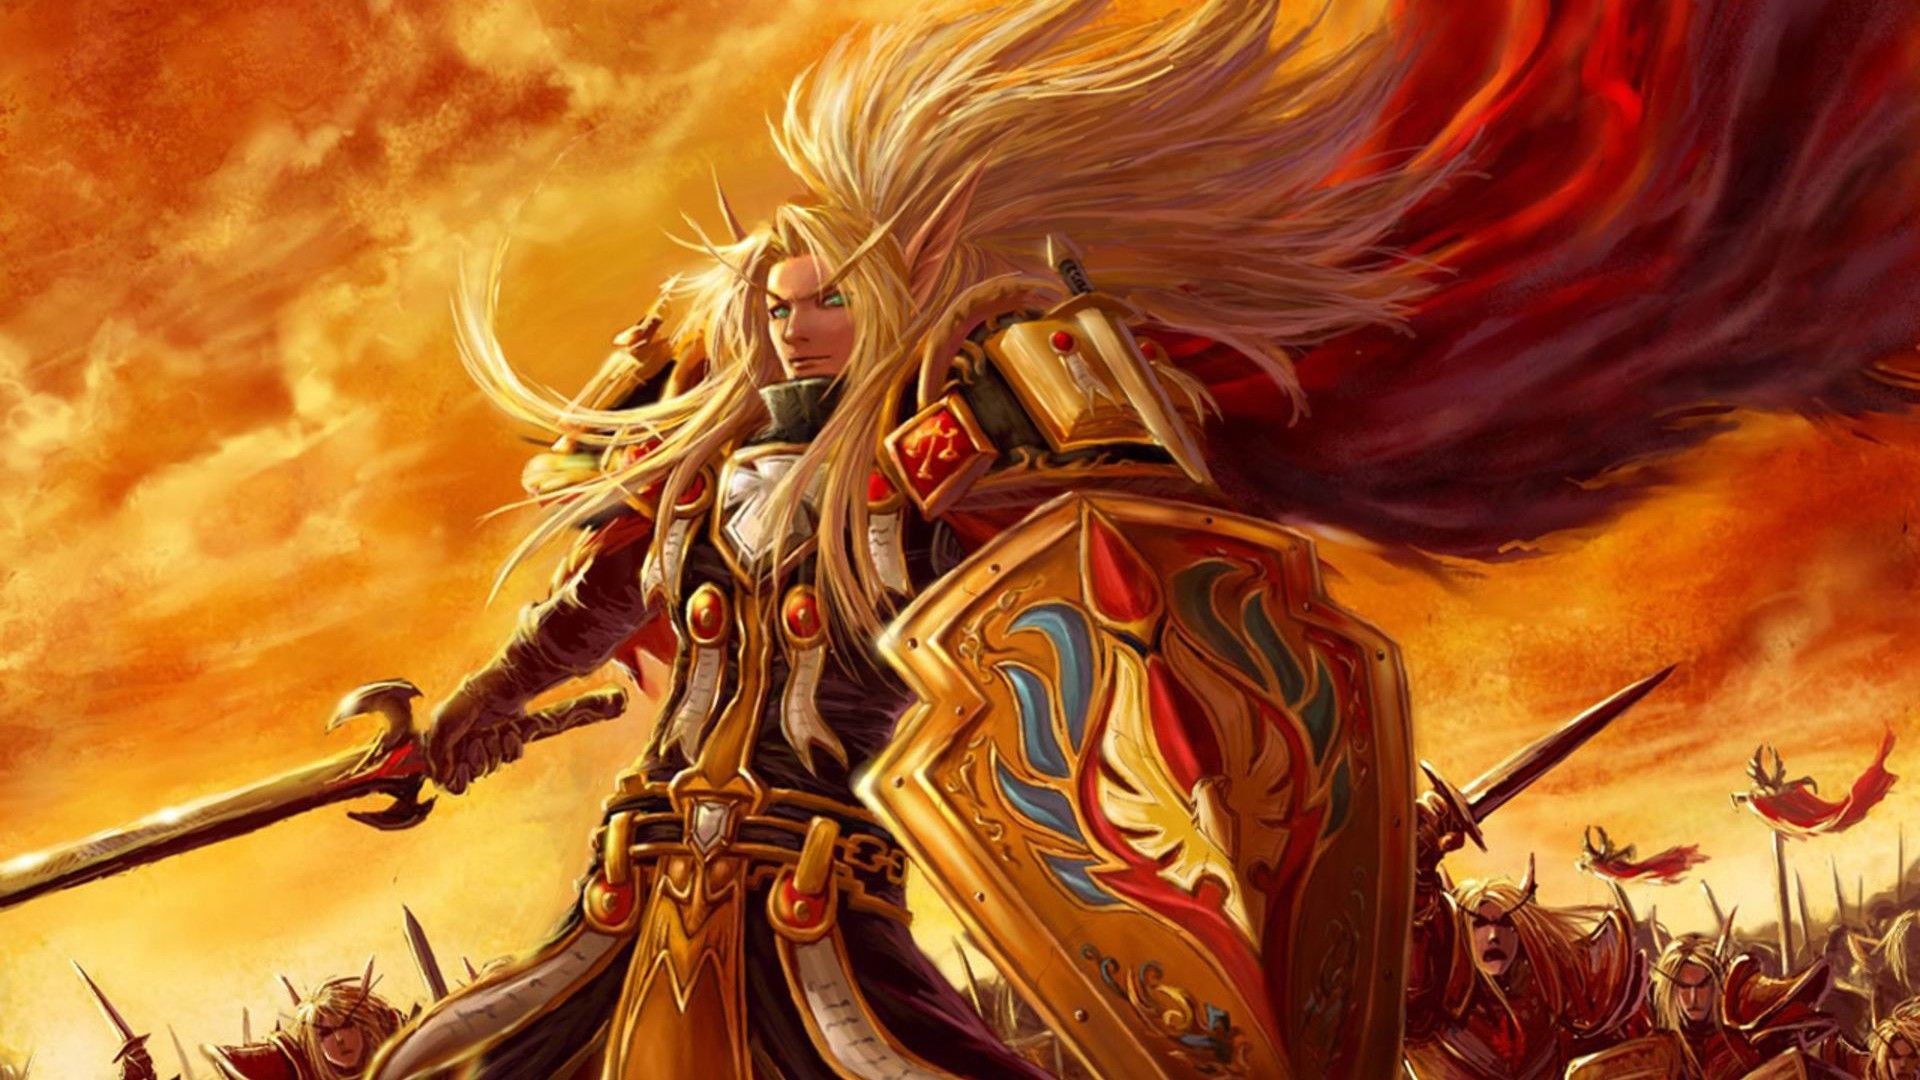 1920x1080 Paladin Wallpaper: Wallpapers for Gt World Of Warcraft Wallpaper Paladin  px